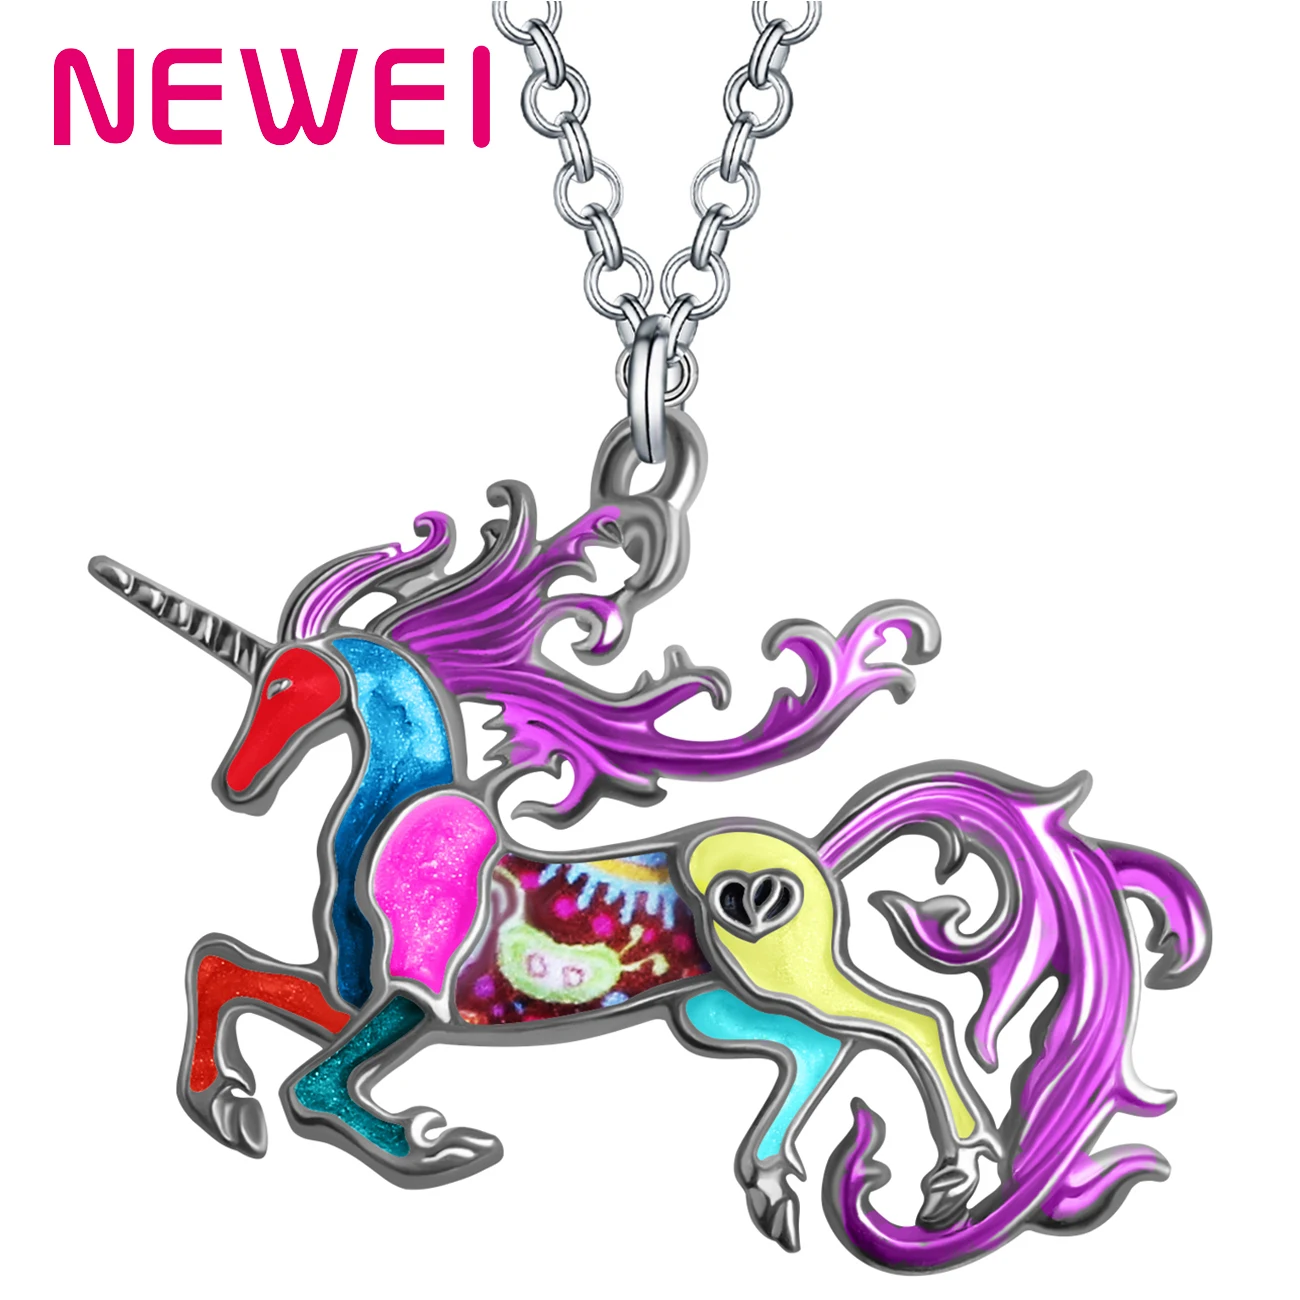 

Enamel Alloy Floral Sweet Holy Horse Unicorn Necklace Animals Pendant Chain Gifts Fashion Jewelry for Women Teens Girls Charms, Multicolor,blue,black,purple,green,brown